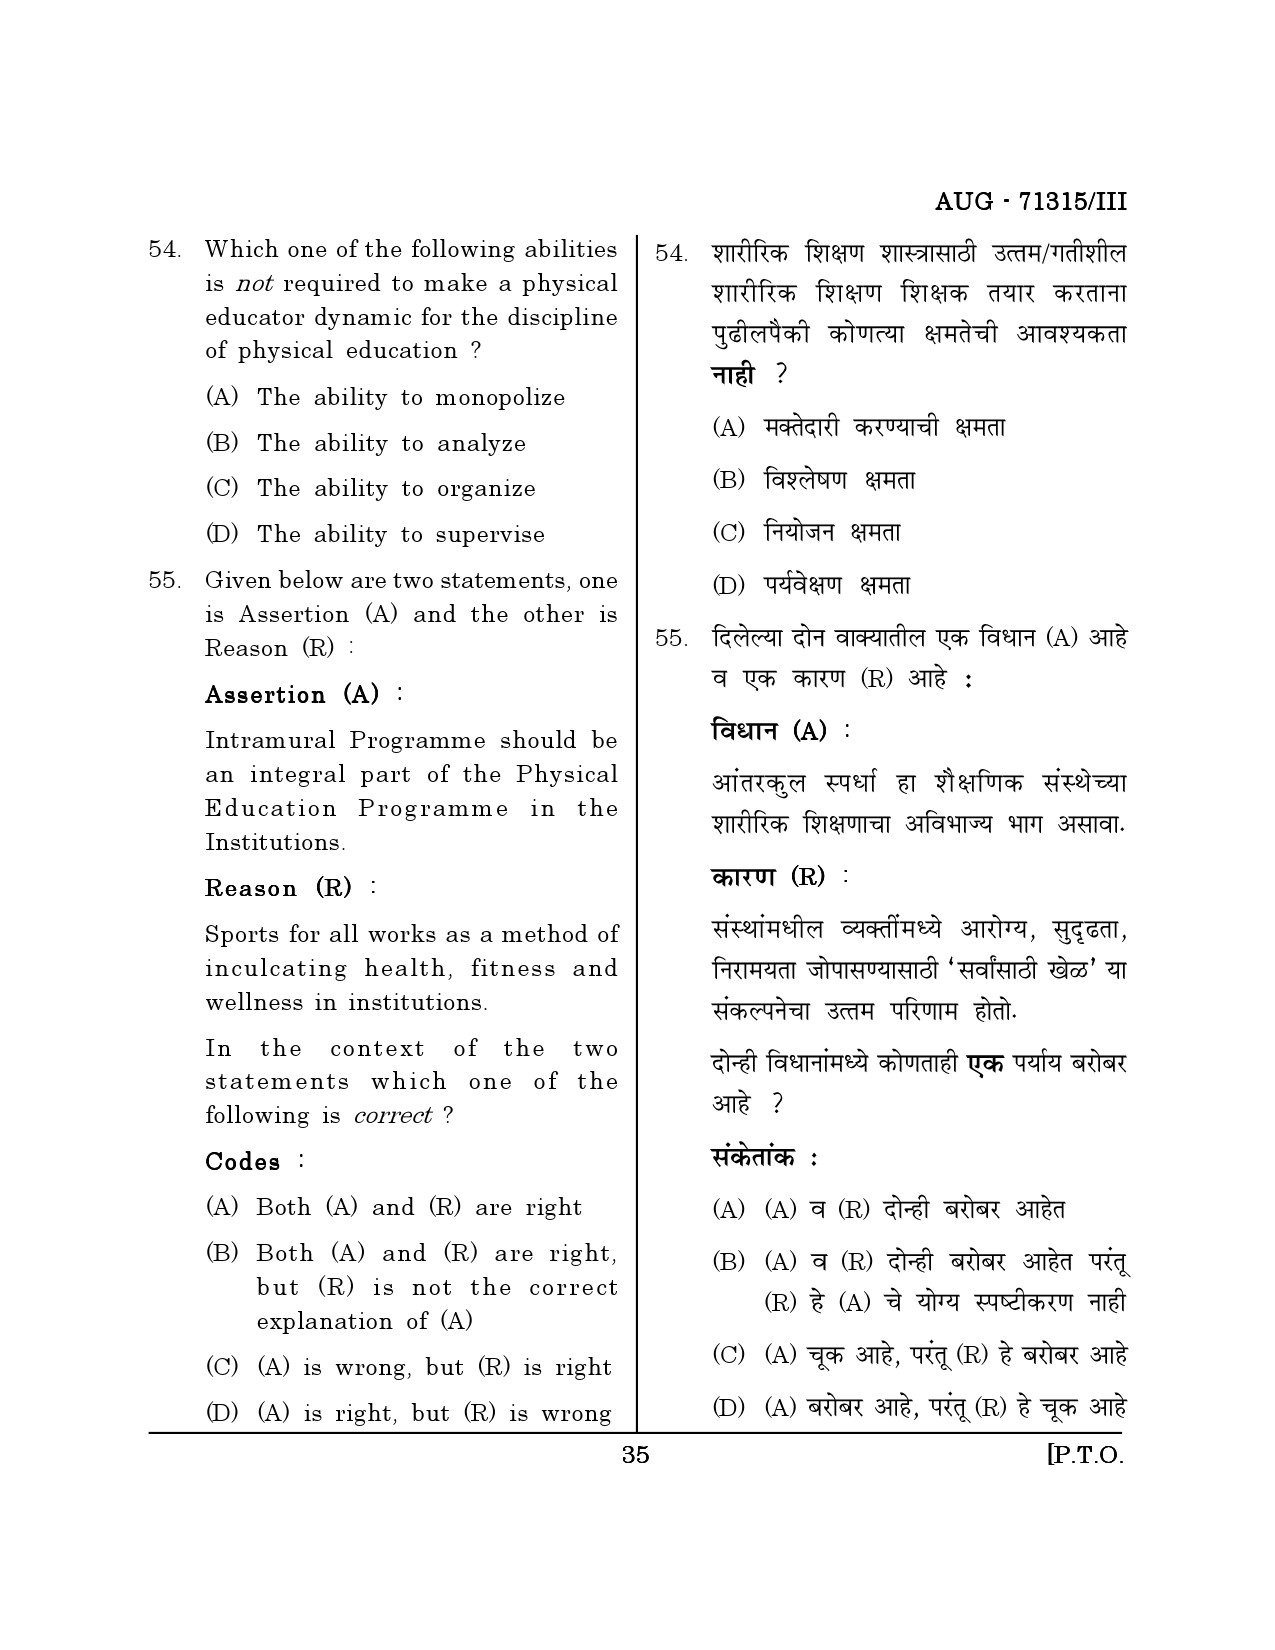 Maharashtra SET Physical Education Question Paper III August 2015 34